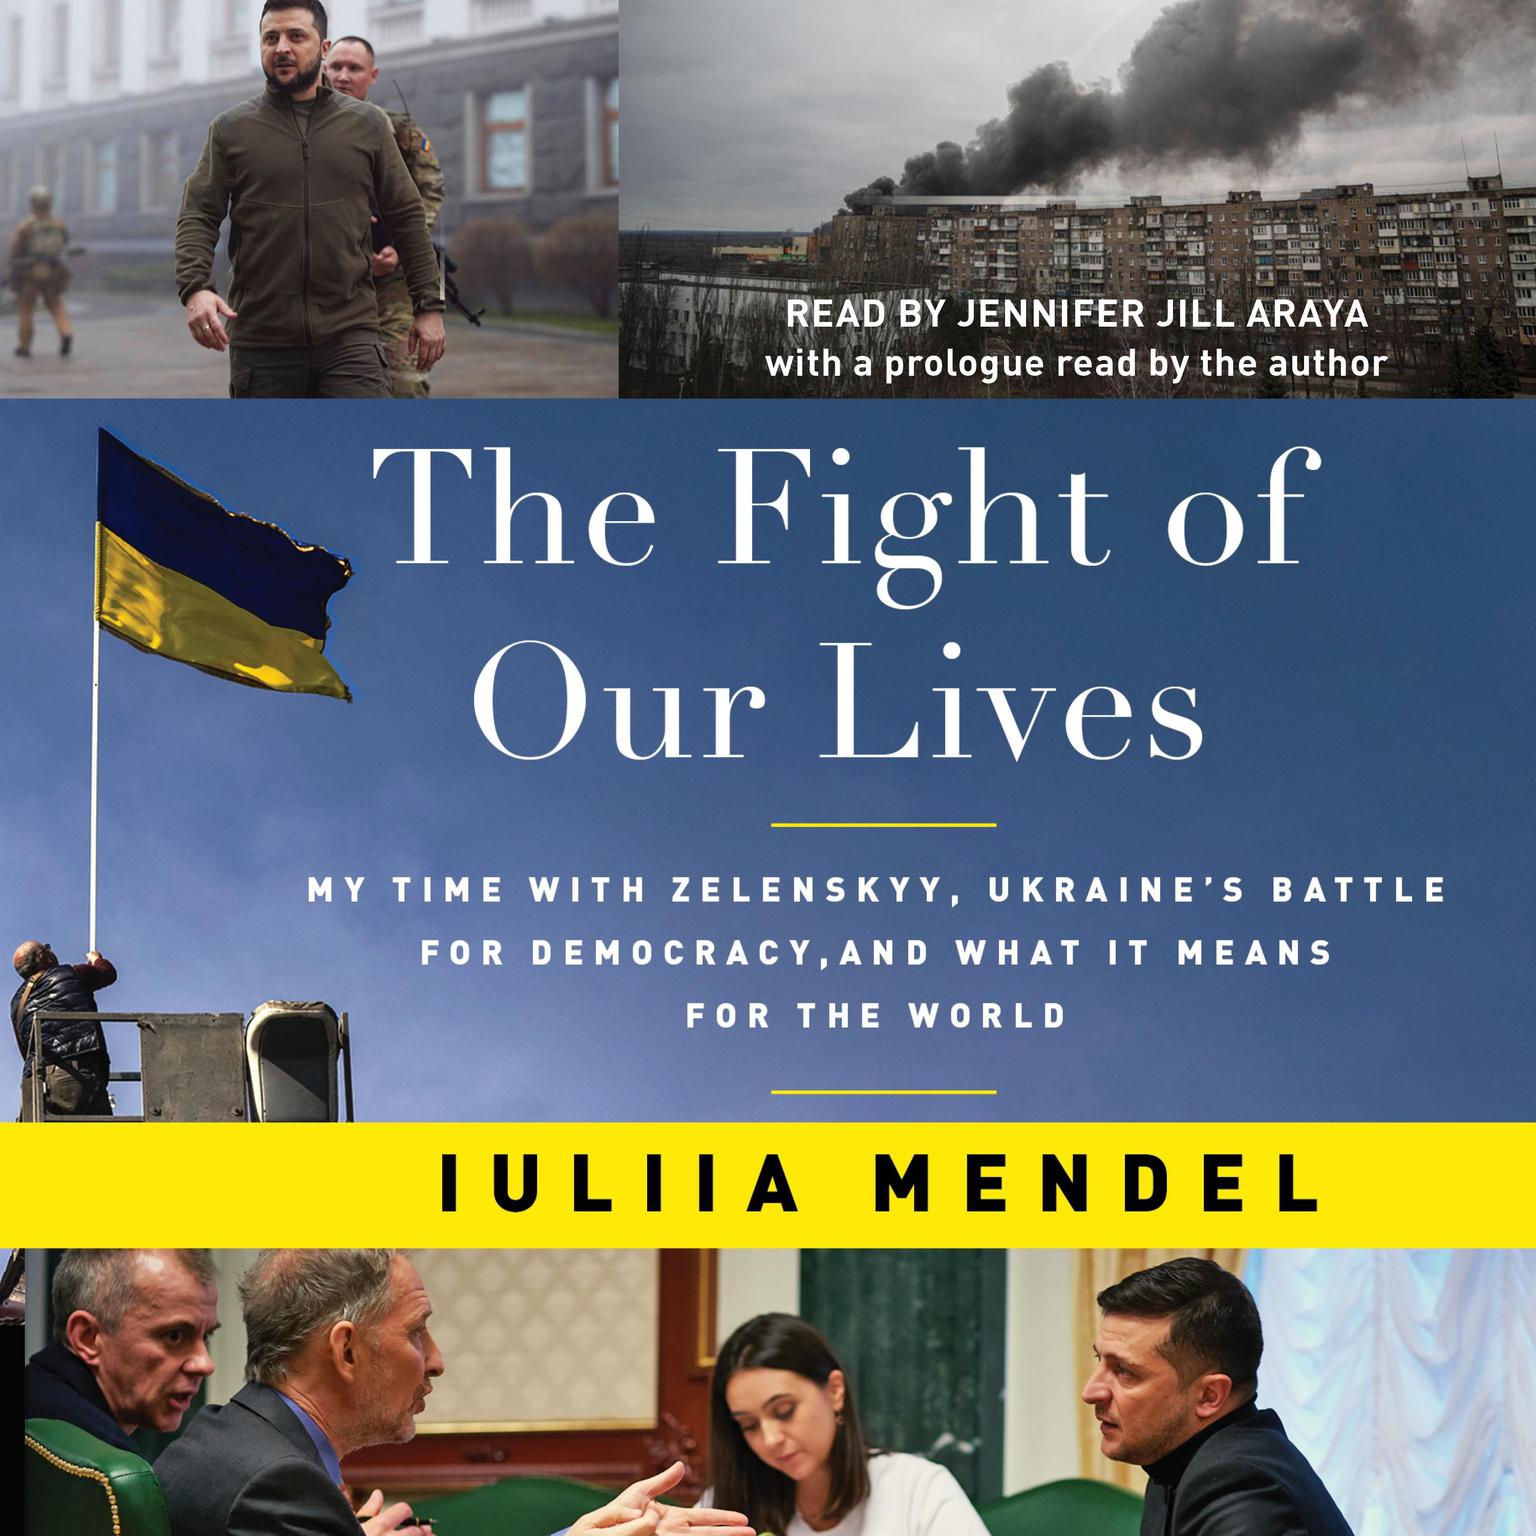 The Fight of Our Lives: My Time with Zelenskyy, Ukraines Battle for Democracy, and What It Means for the World Audiobook, by Iuliia Mendel